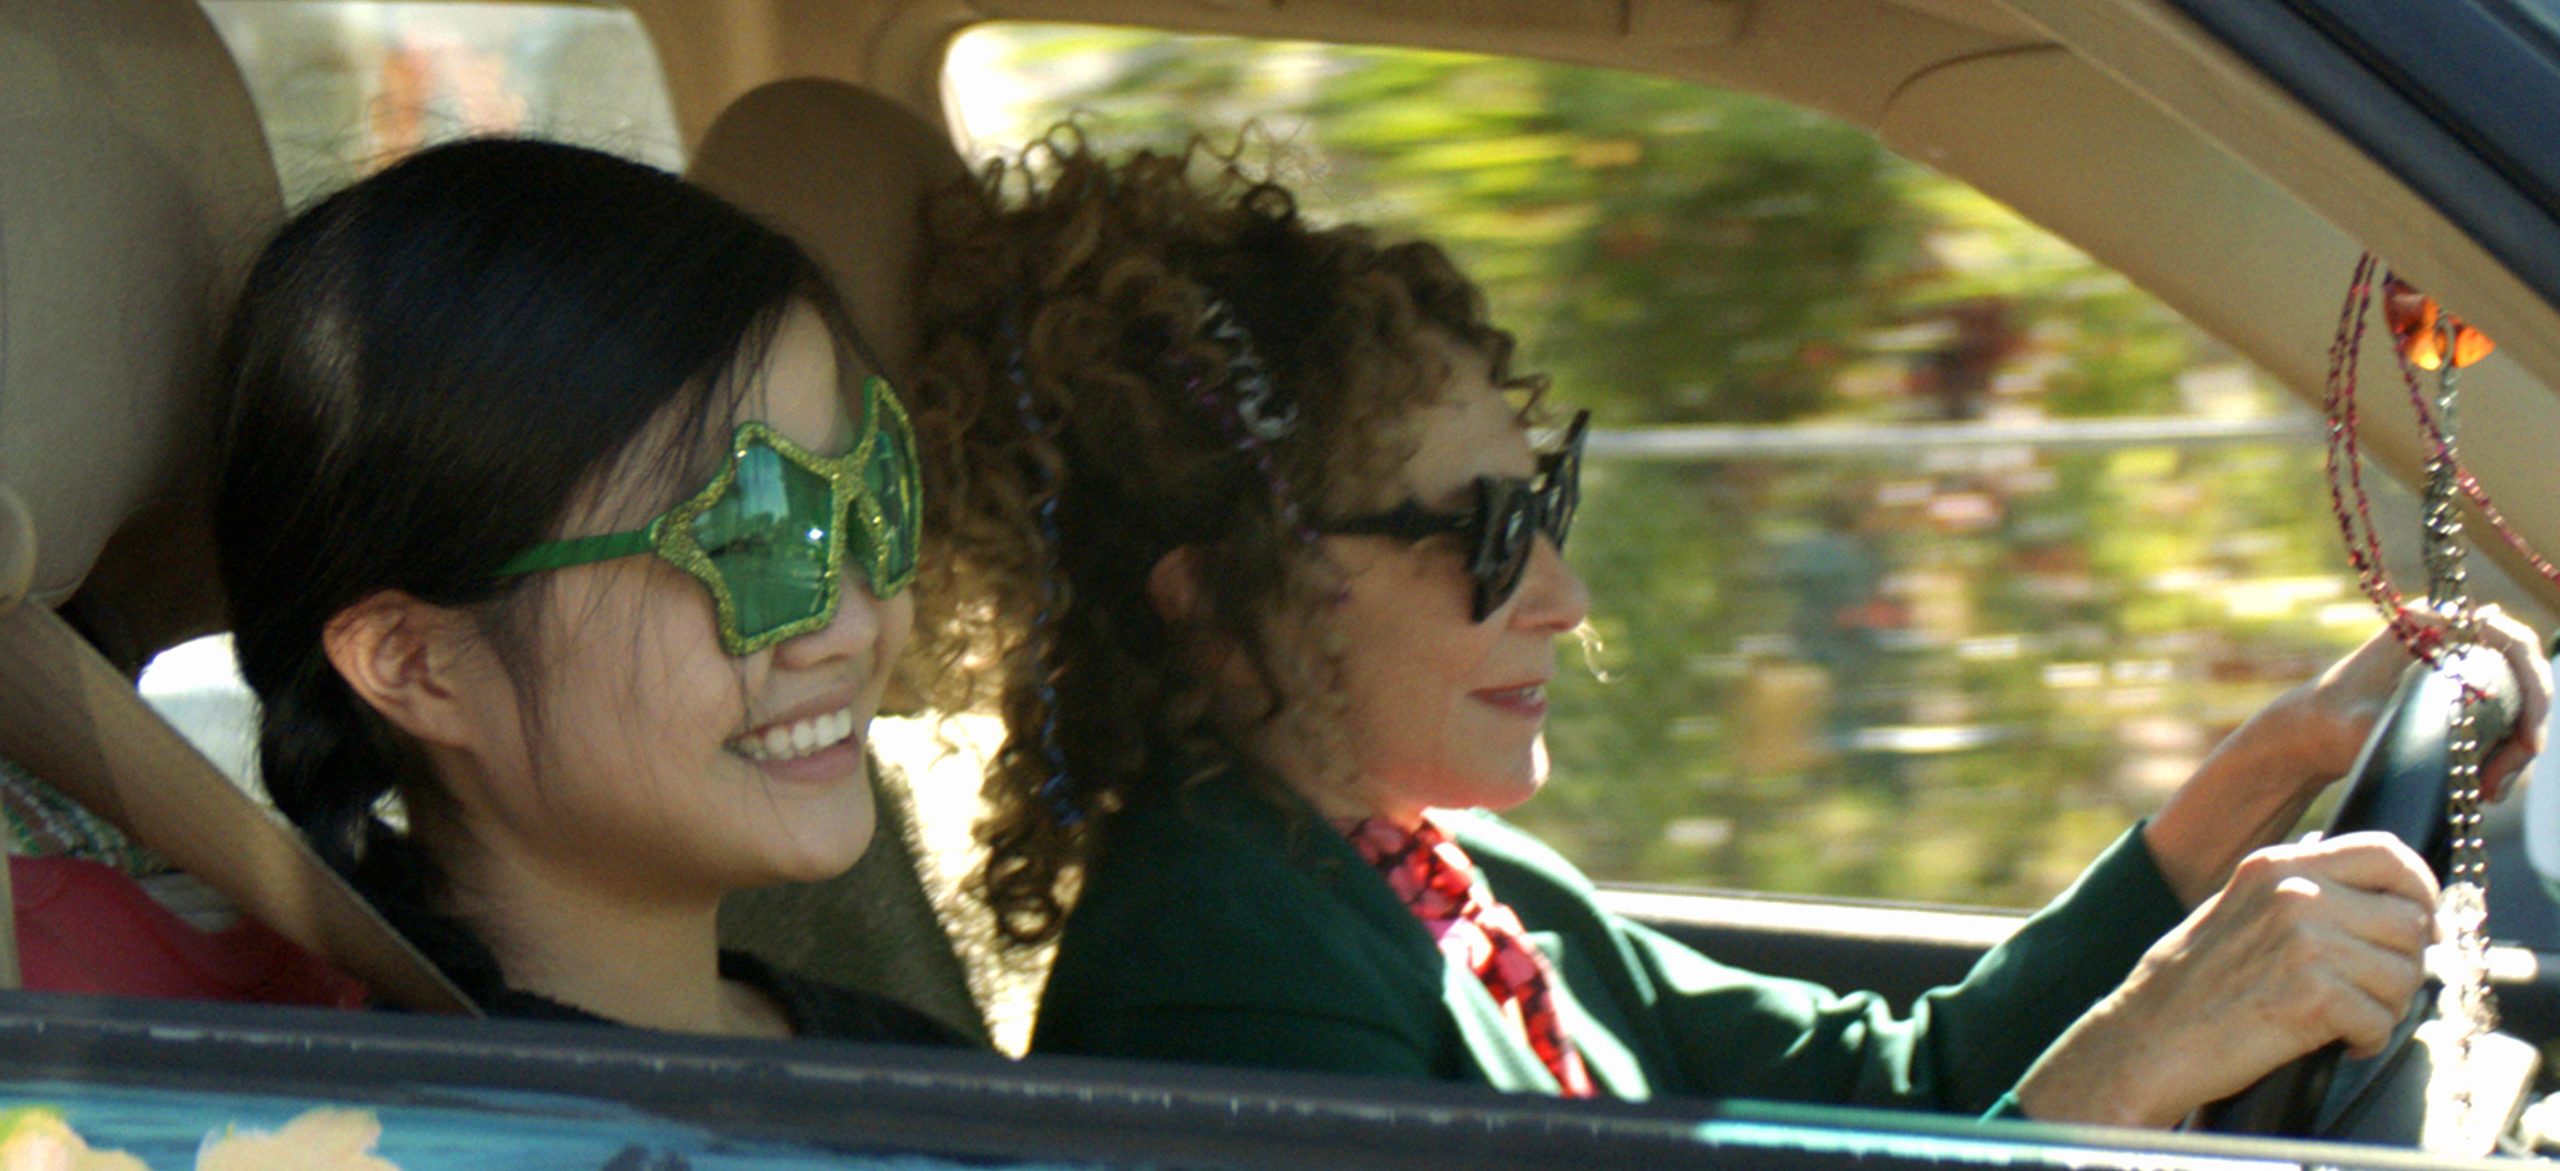 Image from the film 'Marvelous and the Black Hole' (2021). A teenage girl and older woman are seen in a car. They are both happy, and are wearing different colored novelty sunglasses.